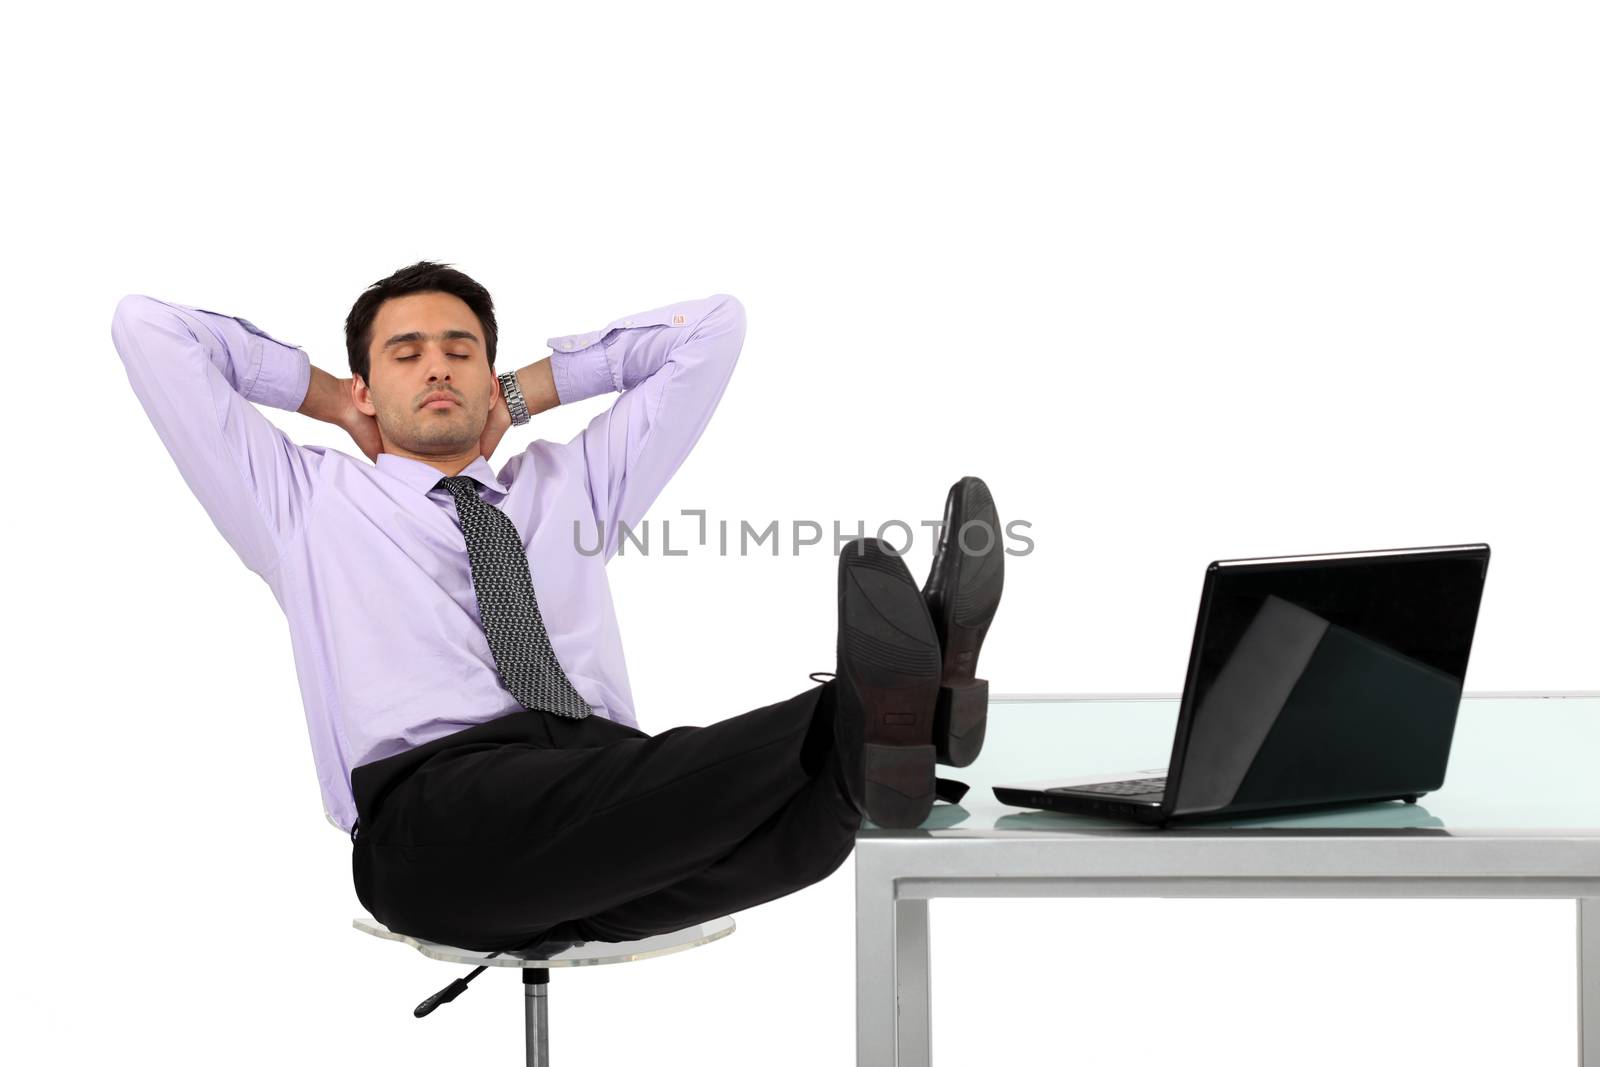 Businessman relaxing at his desk